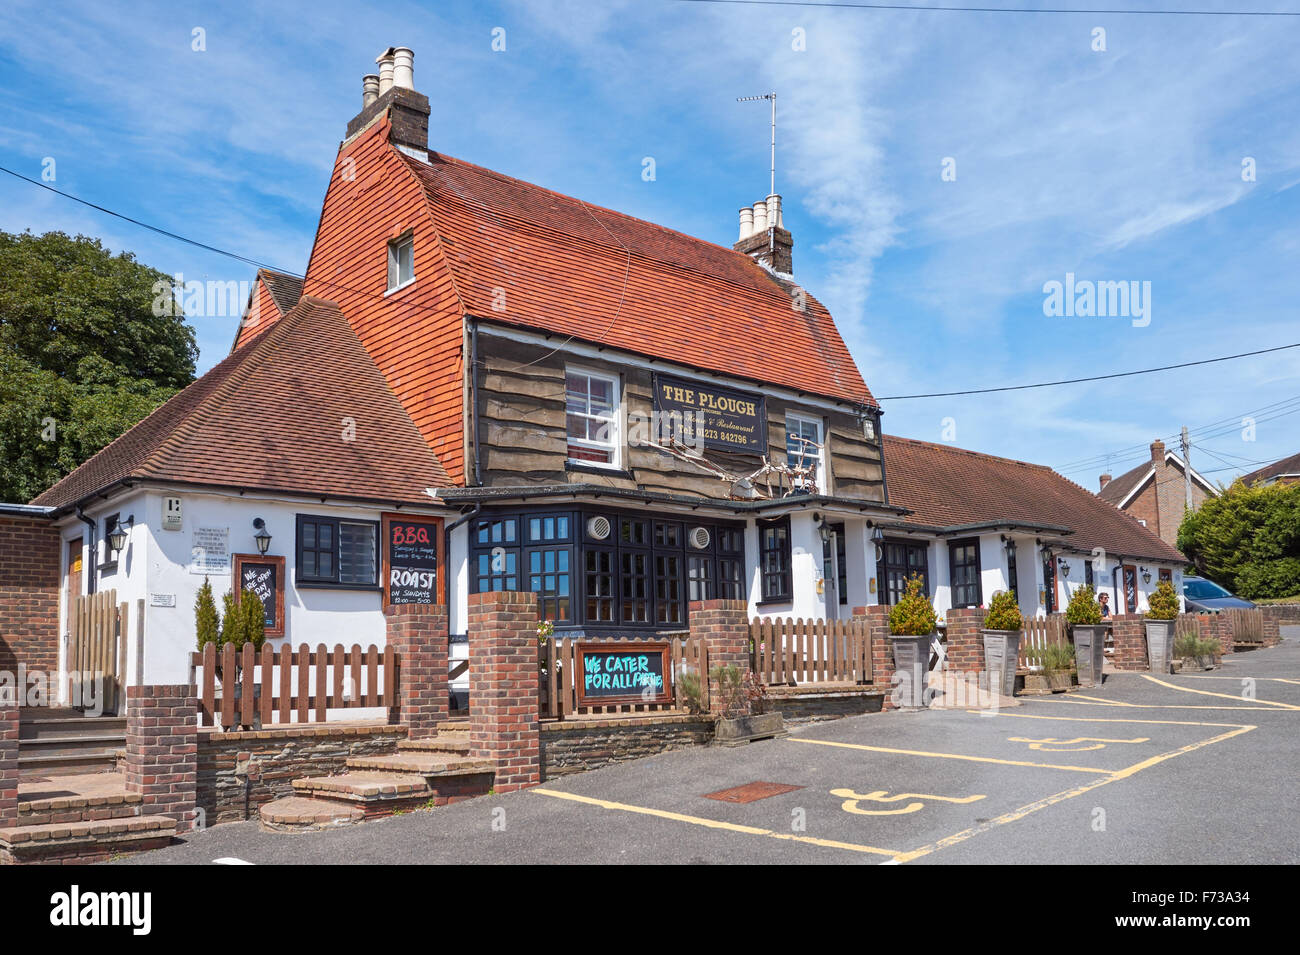 The Plough Inn restaurant in Pyecombe West Sussex England United Kingdom UK Stock Photo